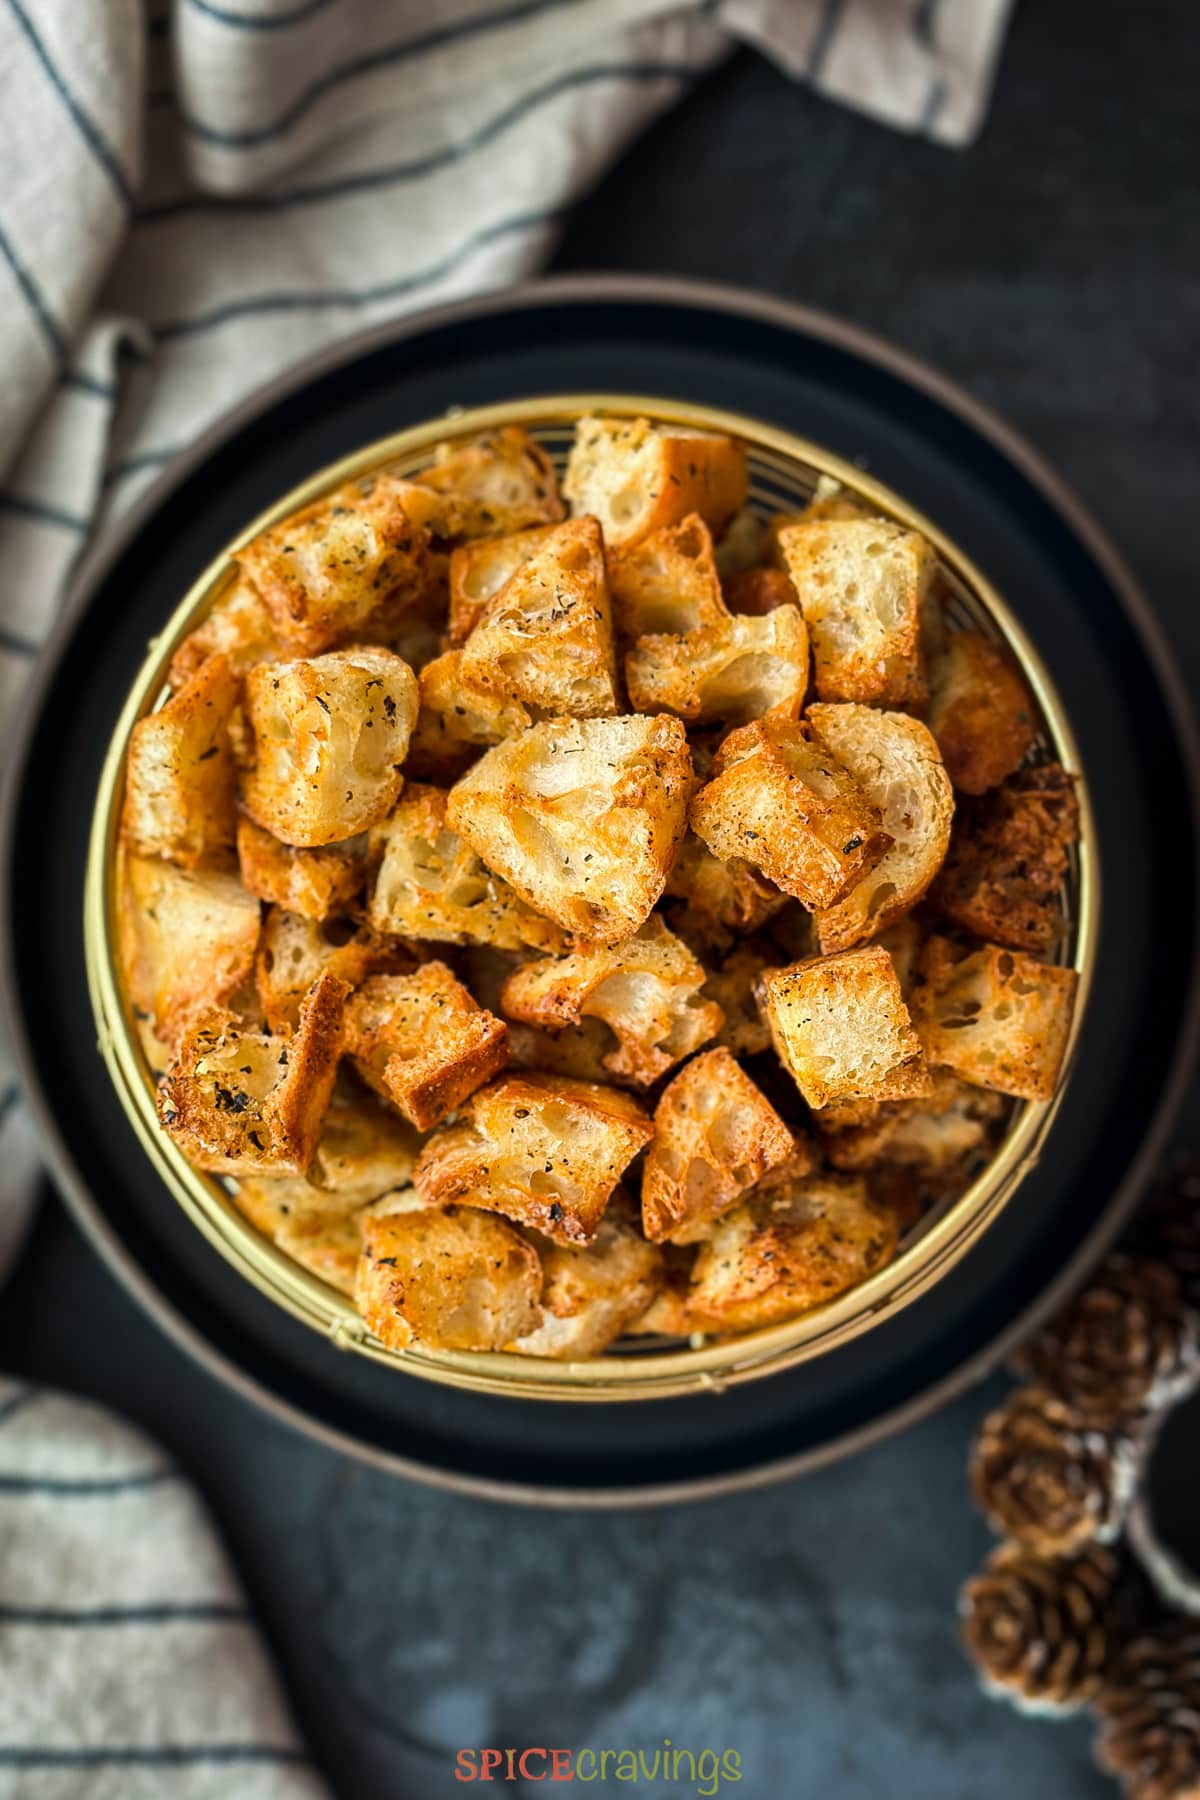 Top view of a bowl full of crisp croutons